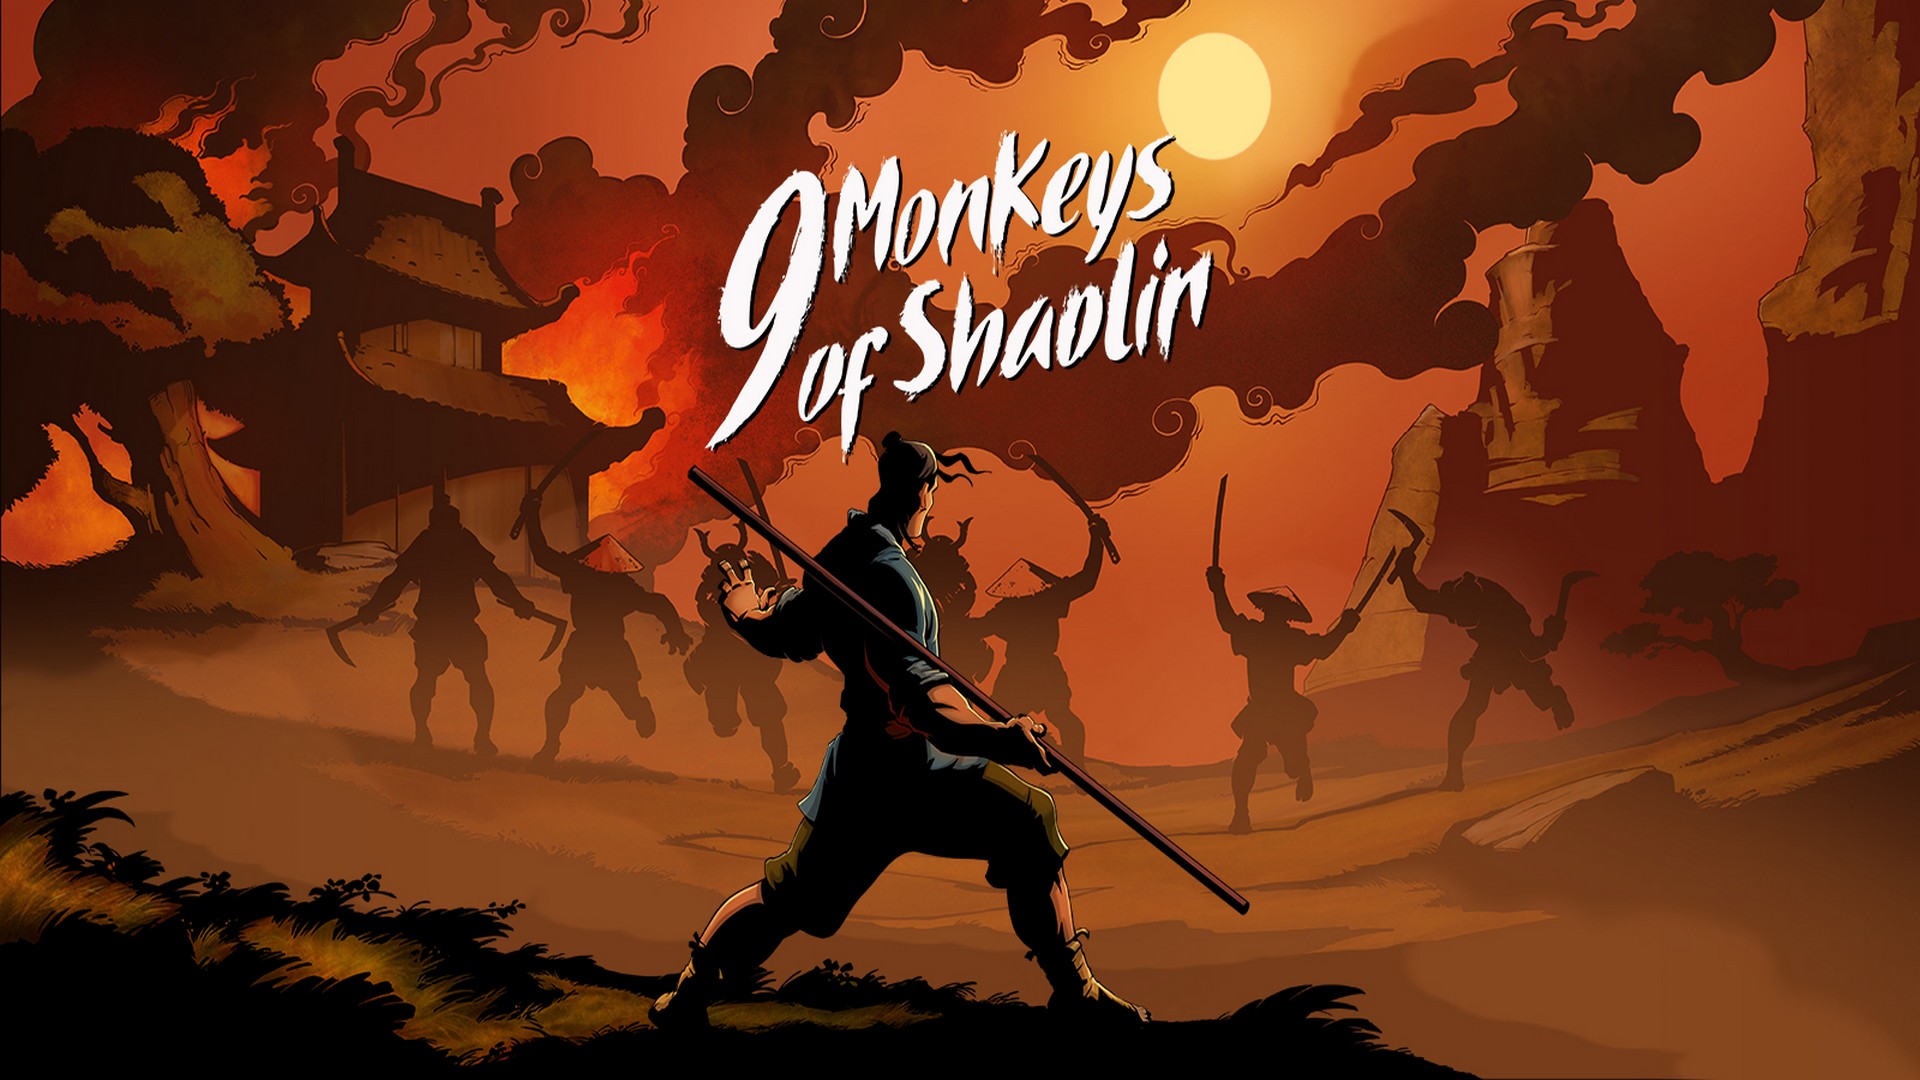 Unleash Your Inner Monk! 9 Monkeys Of Shaolin Releases New Accolades Trailer